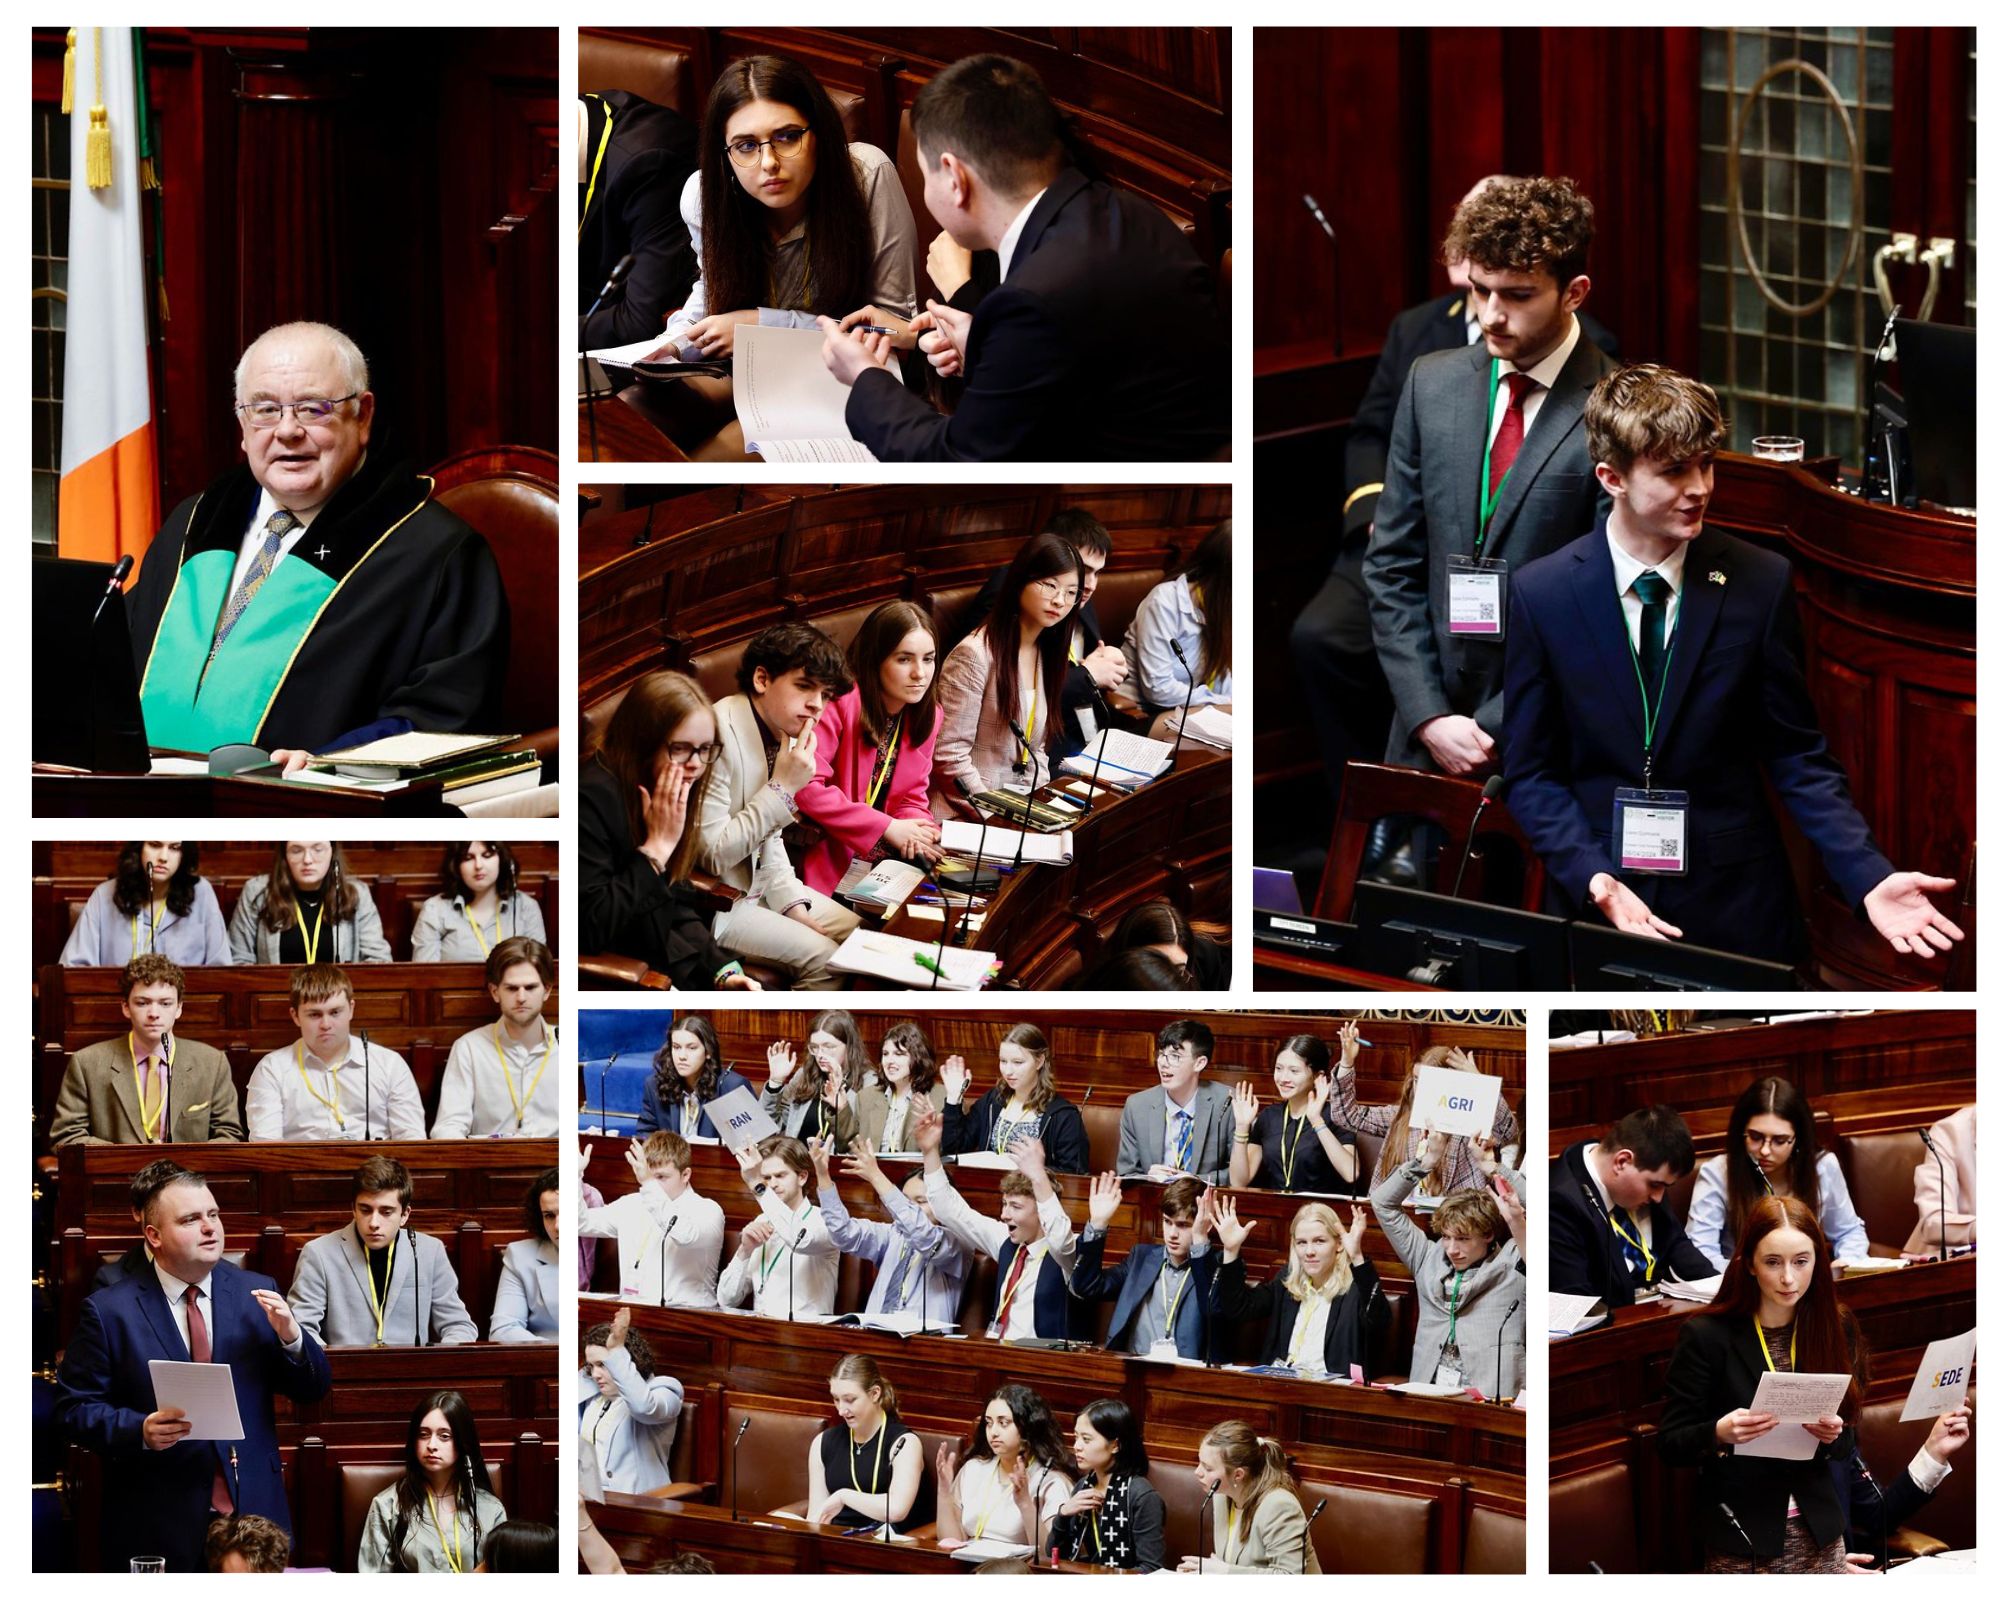 Delegates attending the EYP event in the Dáil Chamber